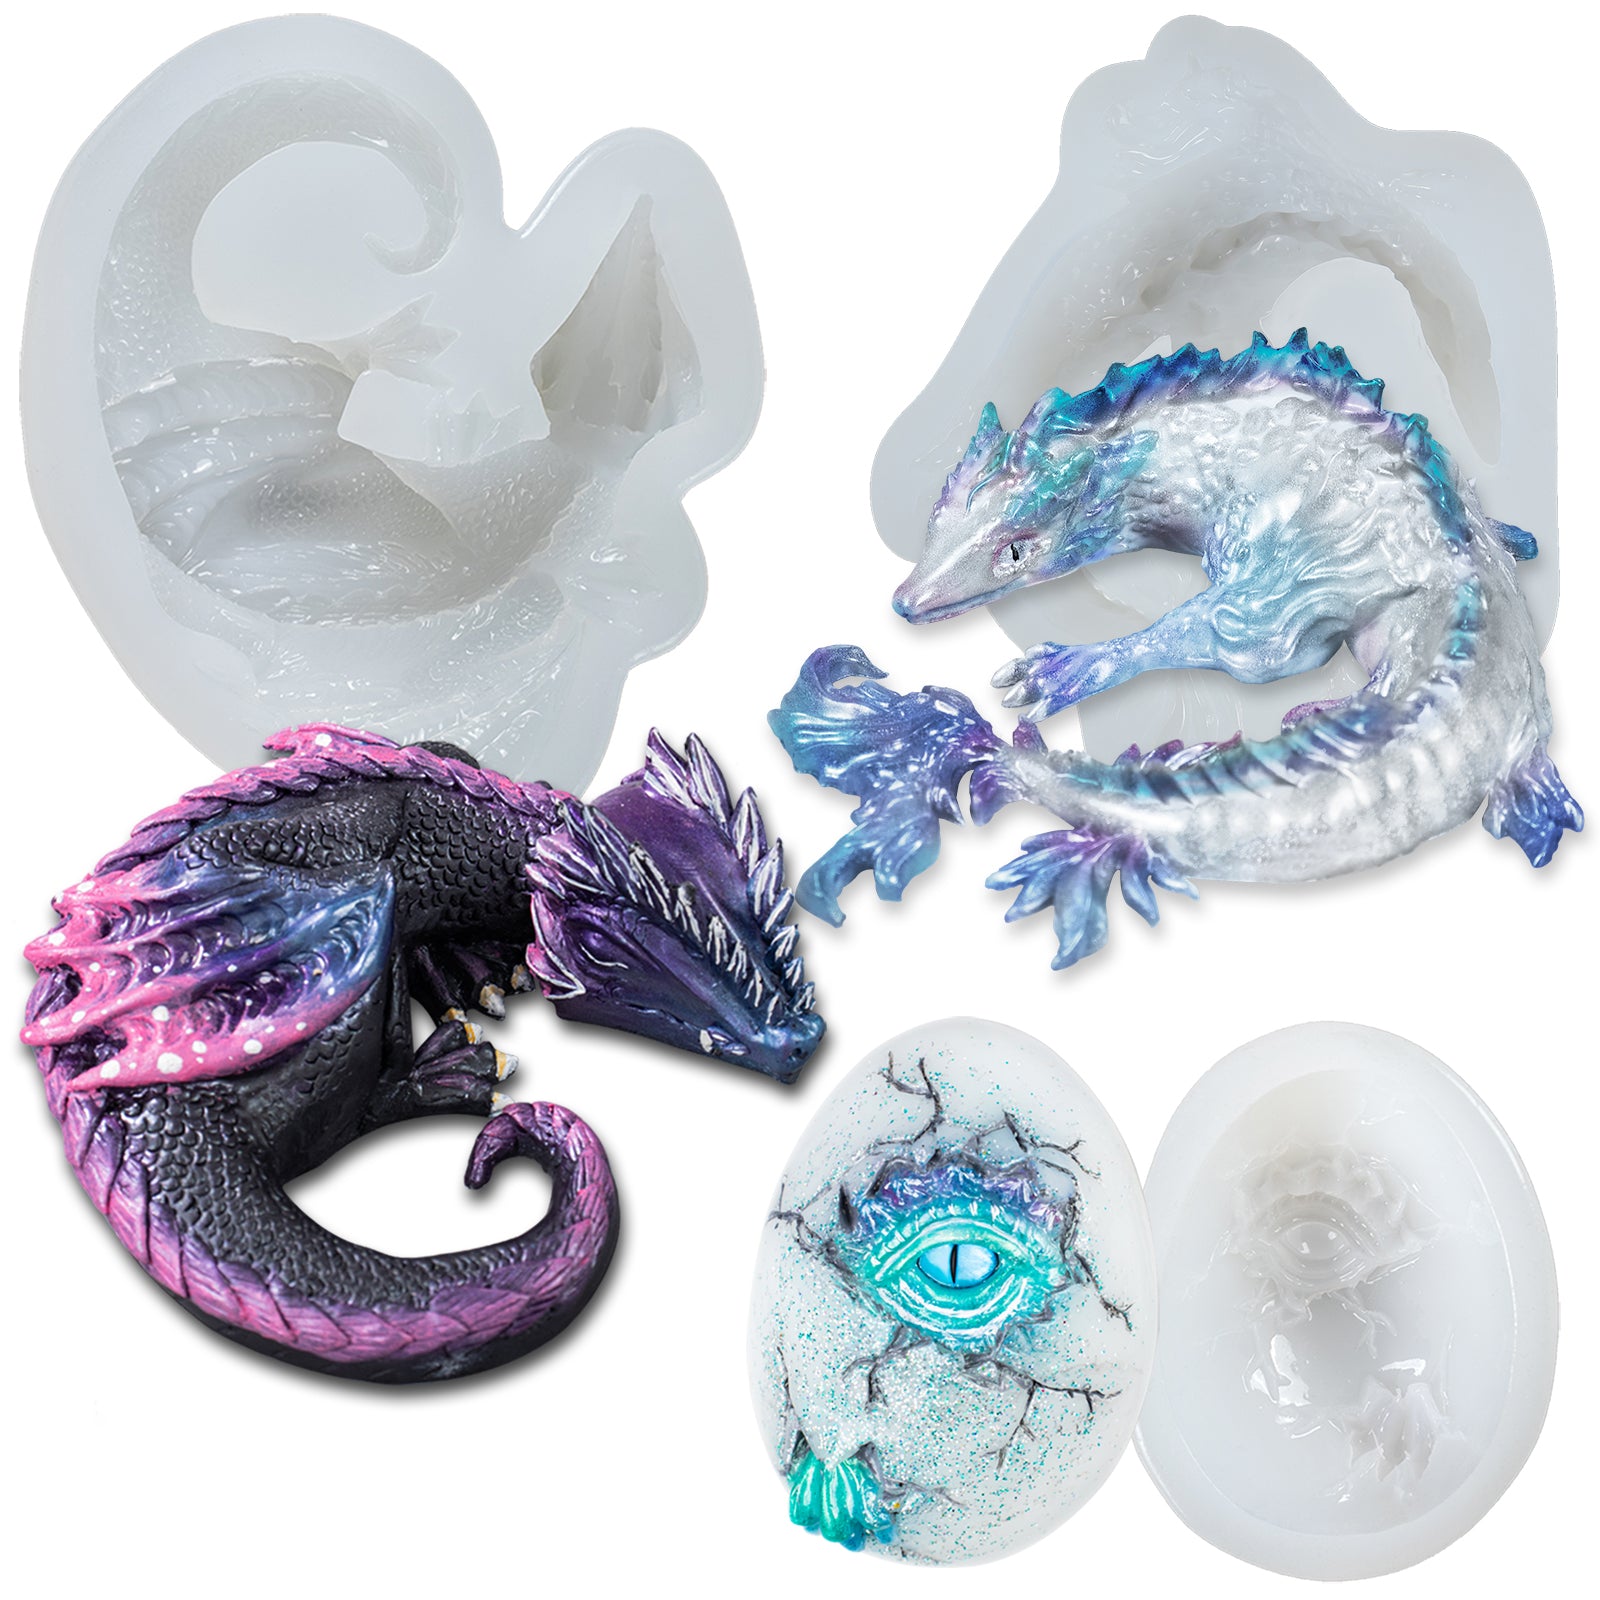 Sleepy Dragon Mould Cement Polymer Clay Fire Dragon Asleep ， Epoxy Resin Silicone Mold for Fondant Cake Decorating Concret 